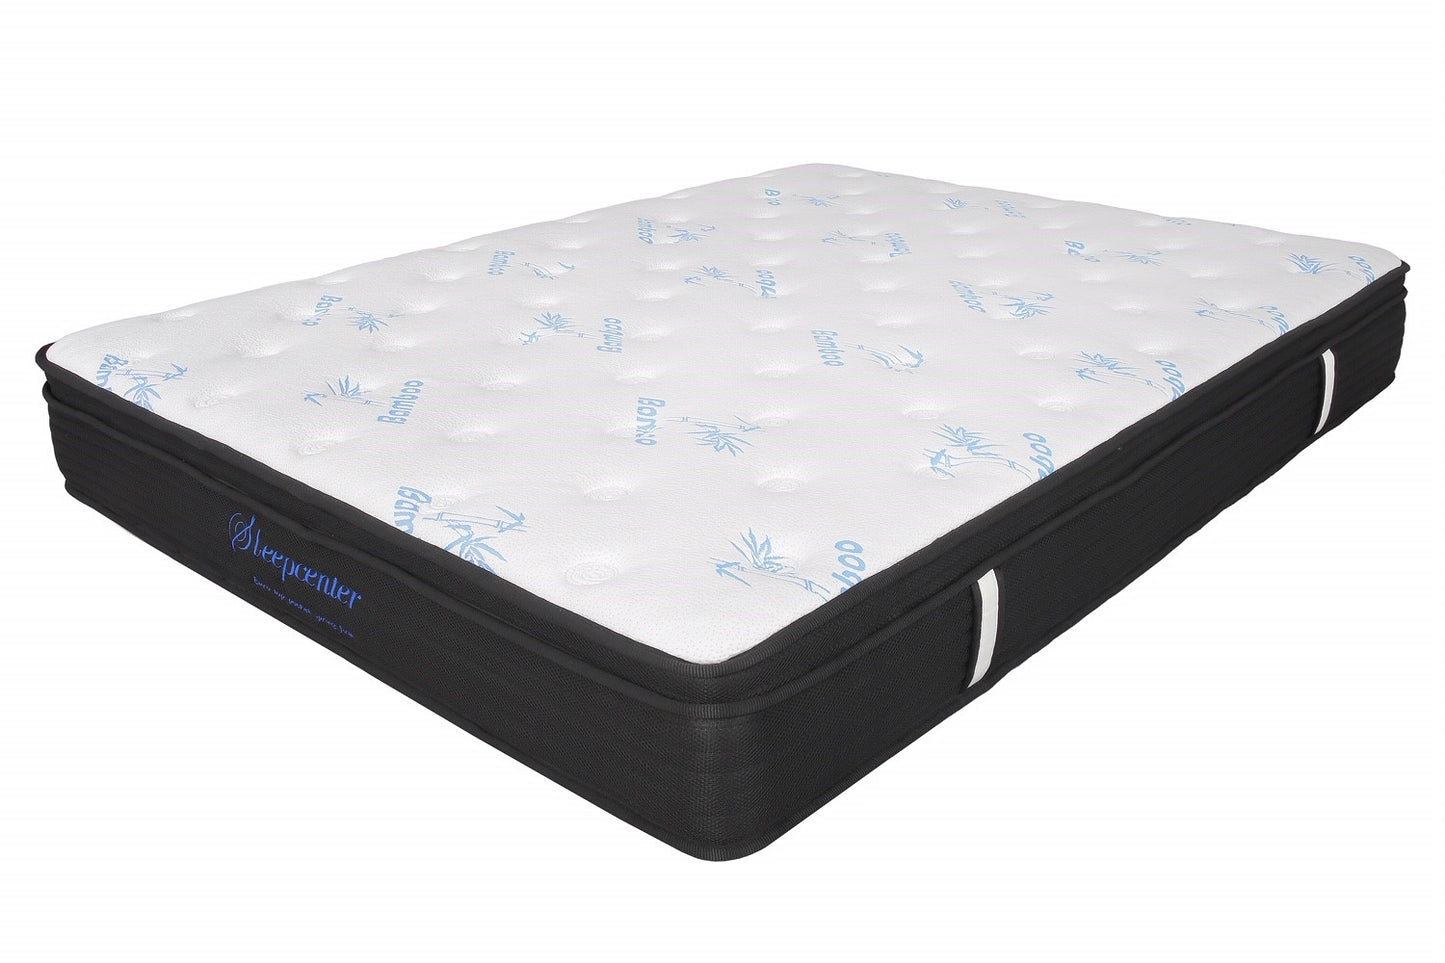 Sleepcenter KING 5 zone pocket spring mattress and fabric bed frame combo